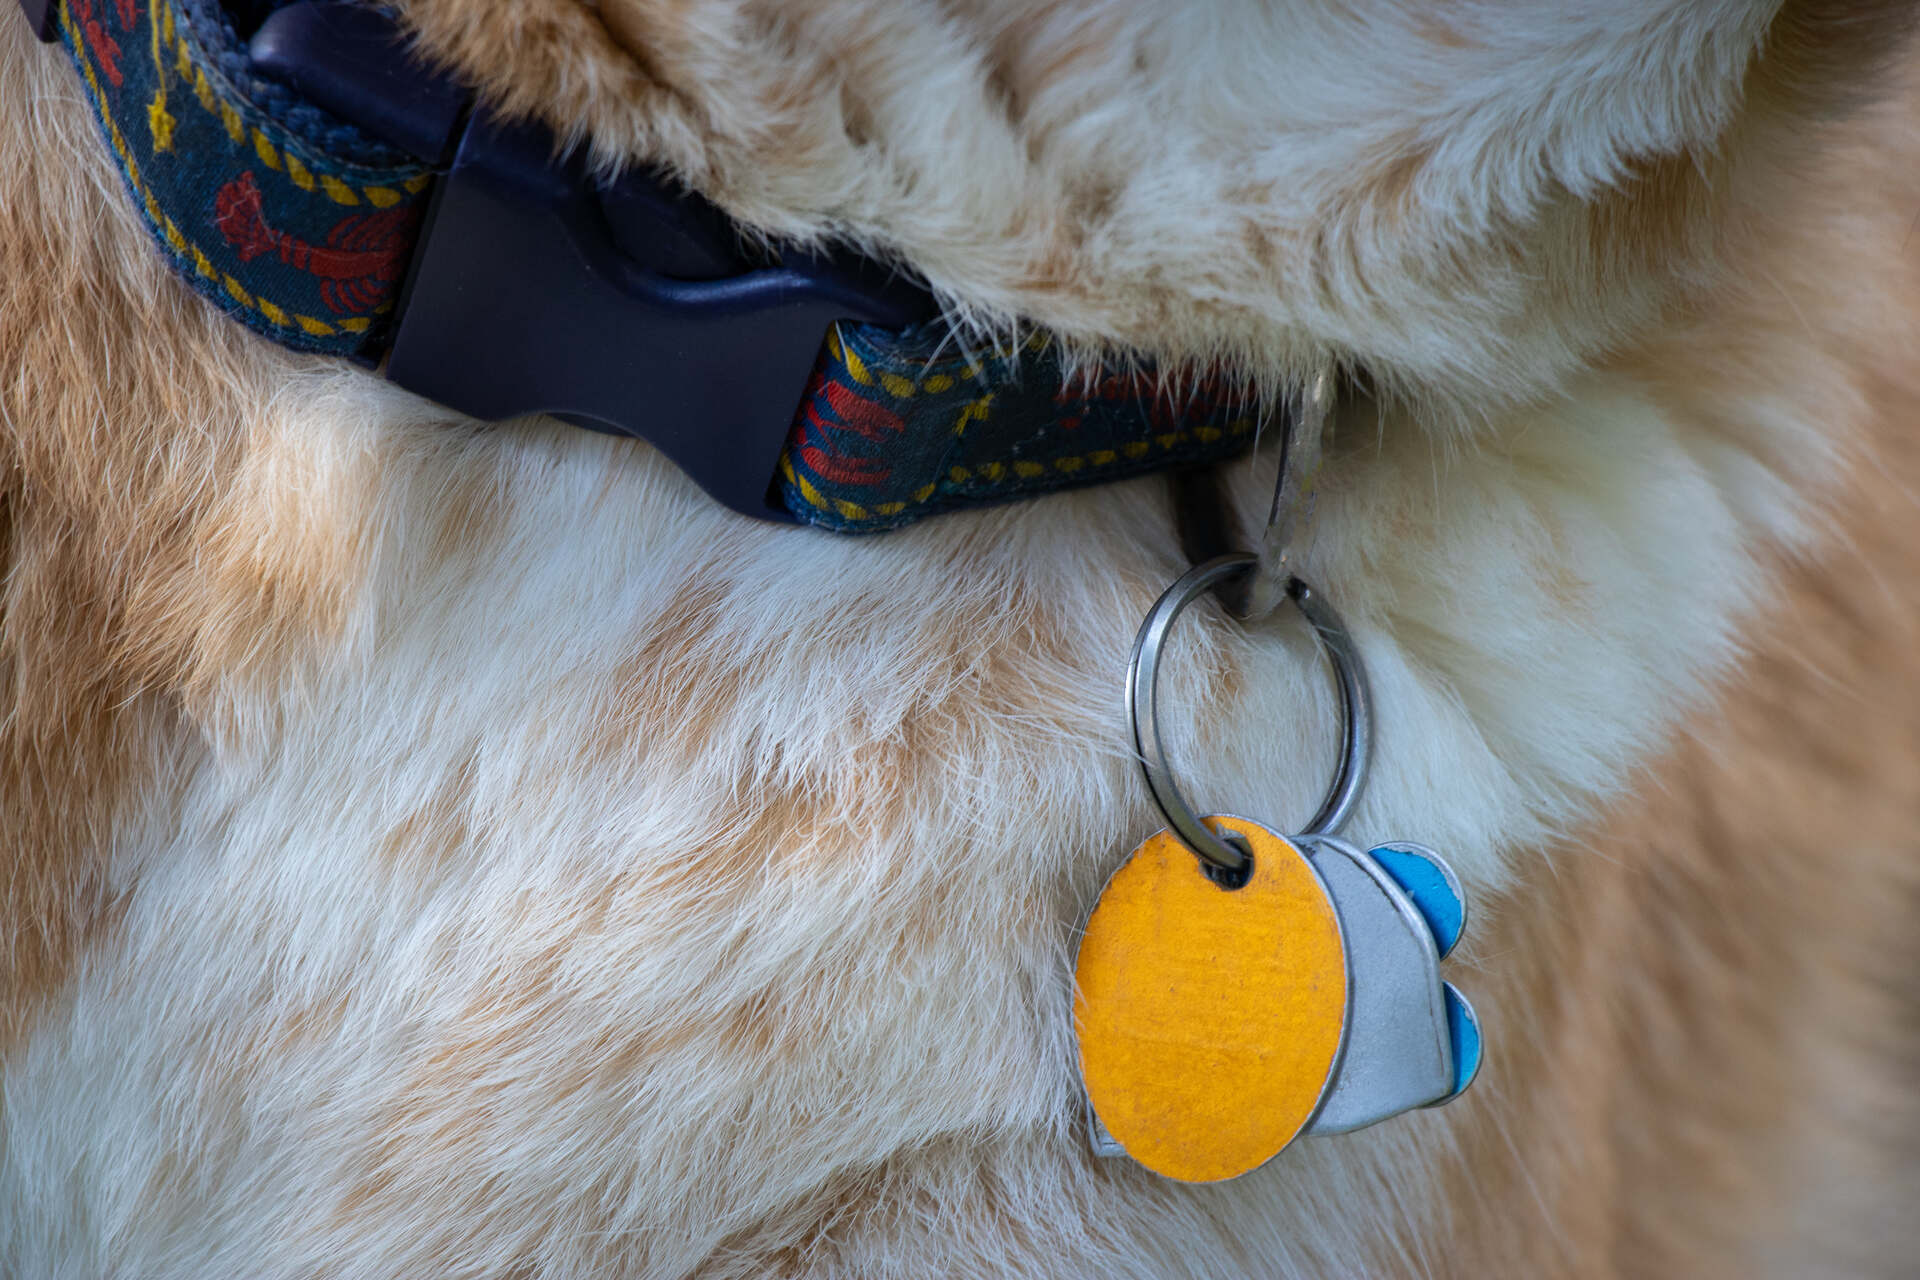 A set of dog ID tags attached to a dog's collar